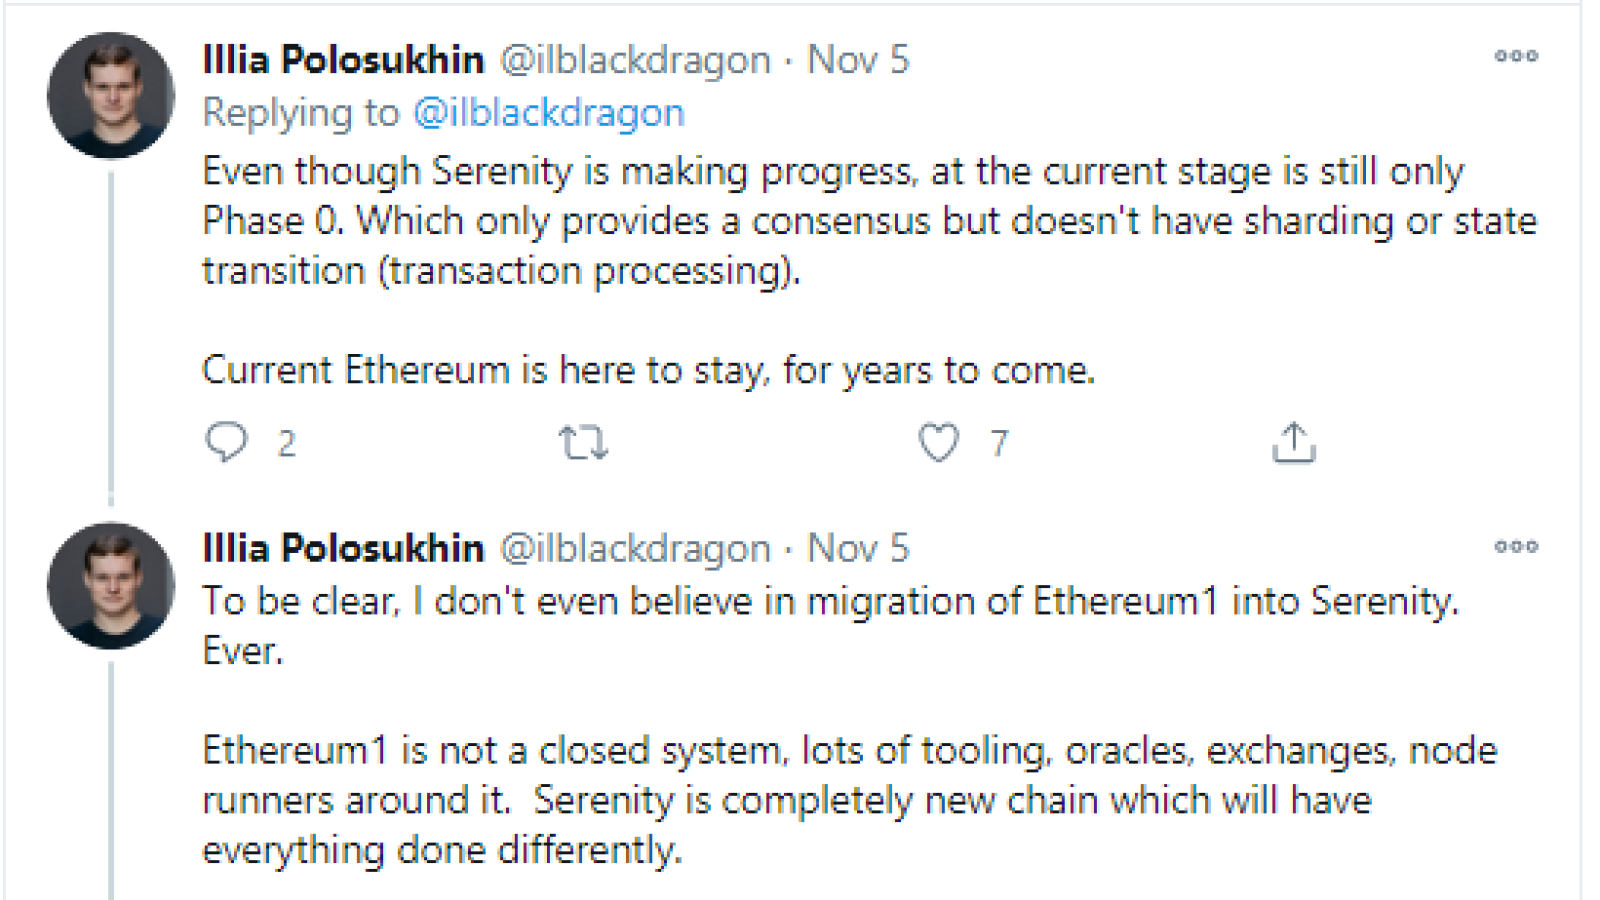 Near's co-founder claims ETH1 won't migrate to ETH2